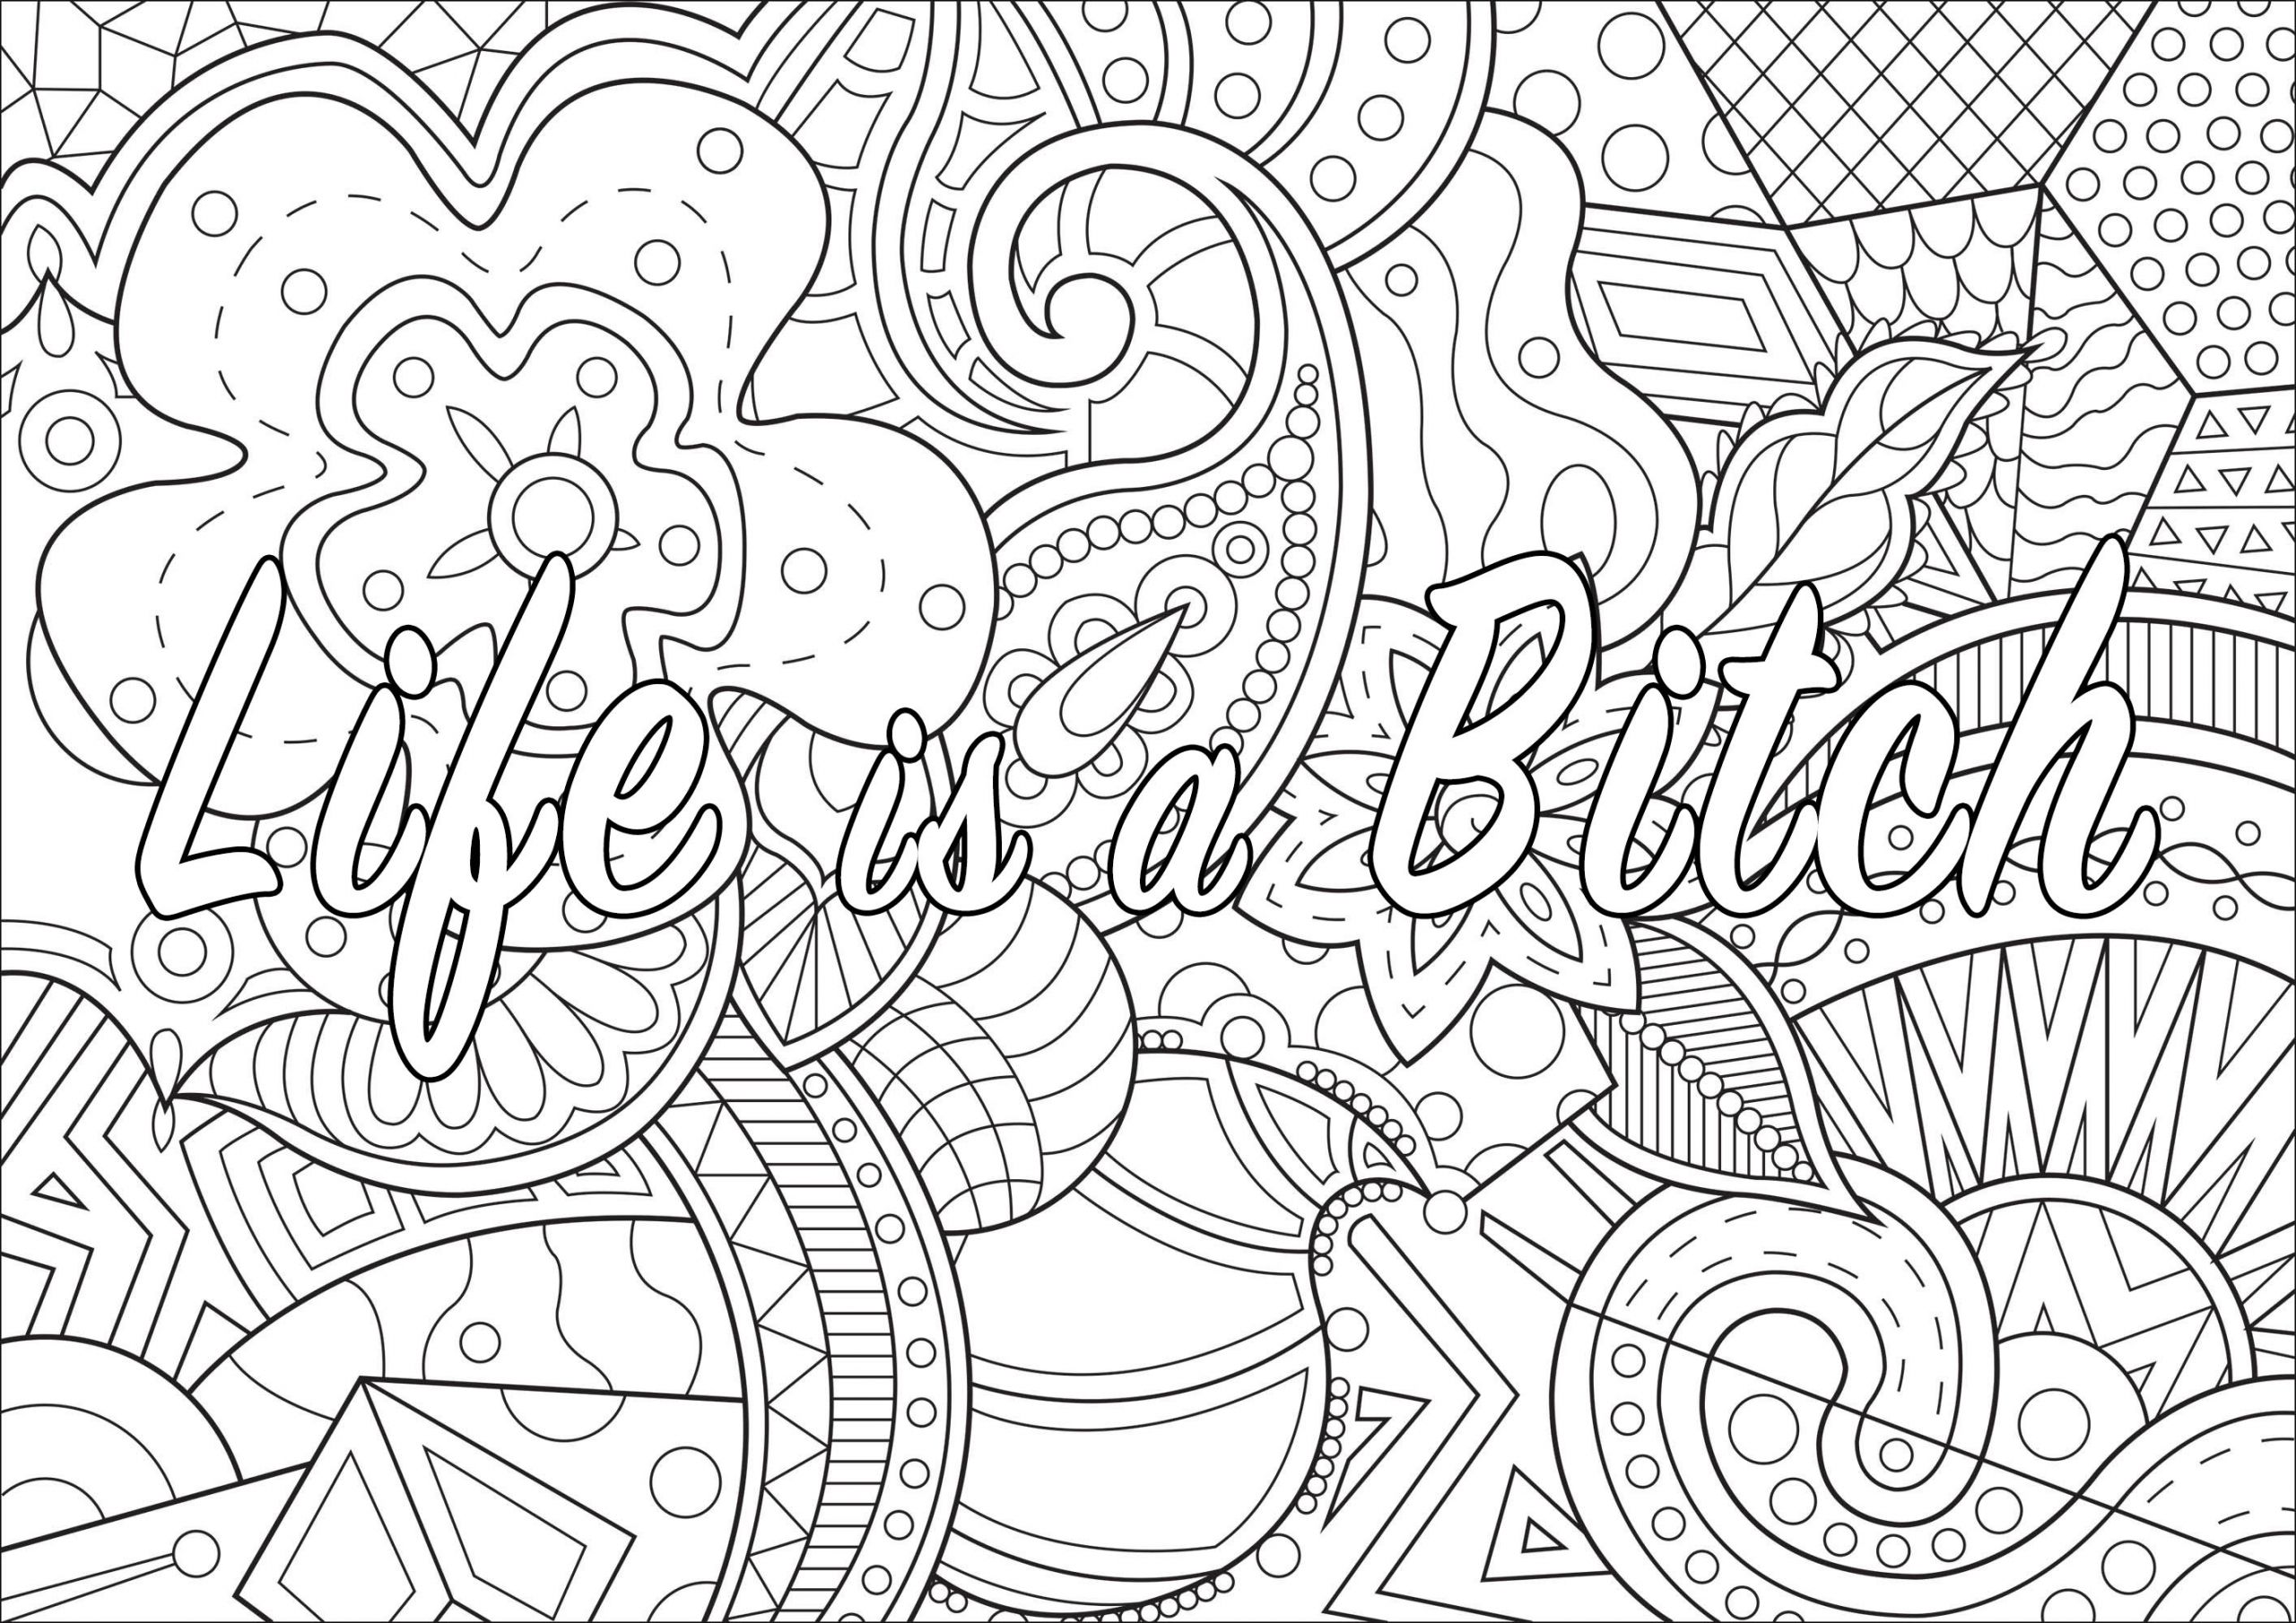 Adult Swear Coloring Pages
 A Coloring Page santaclarapueb ibrary